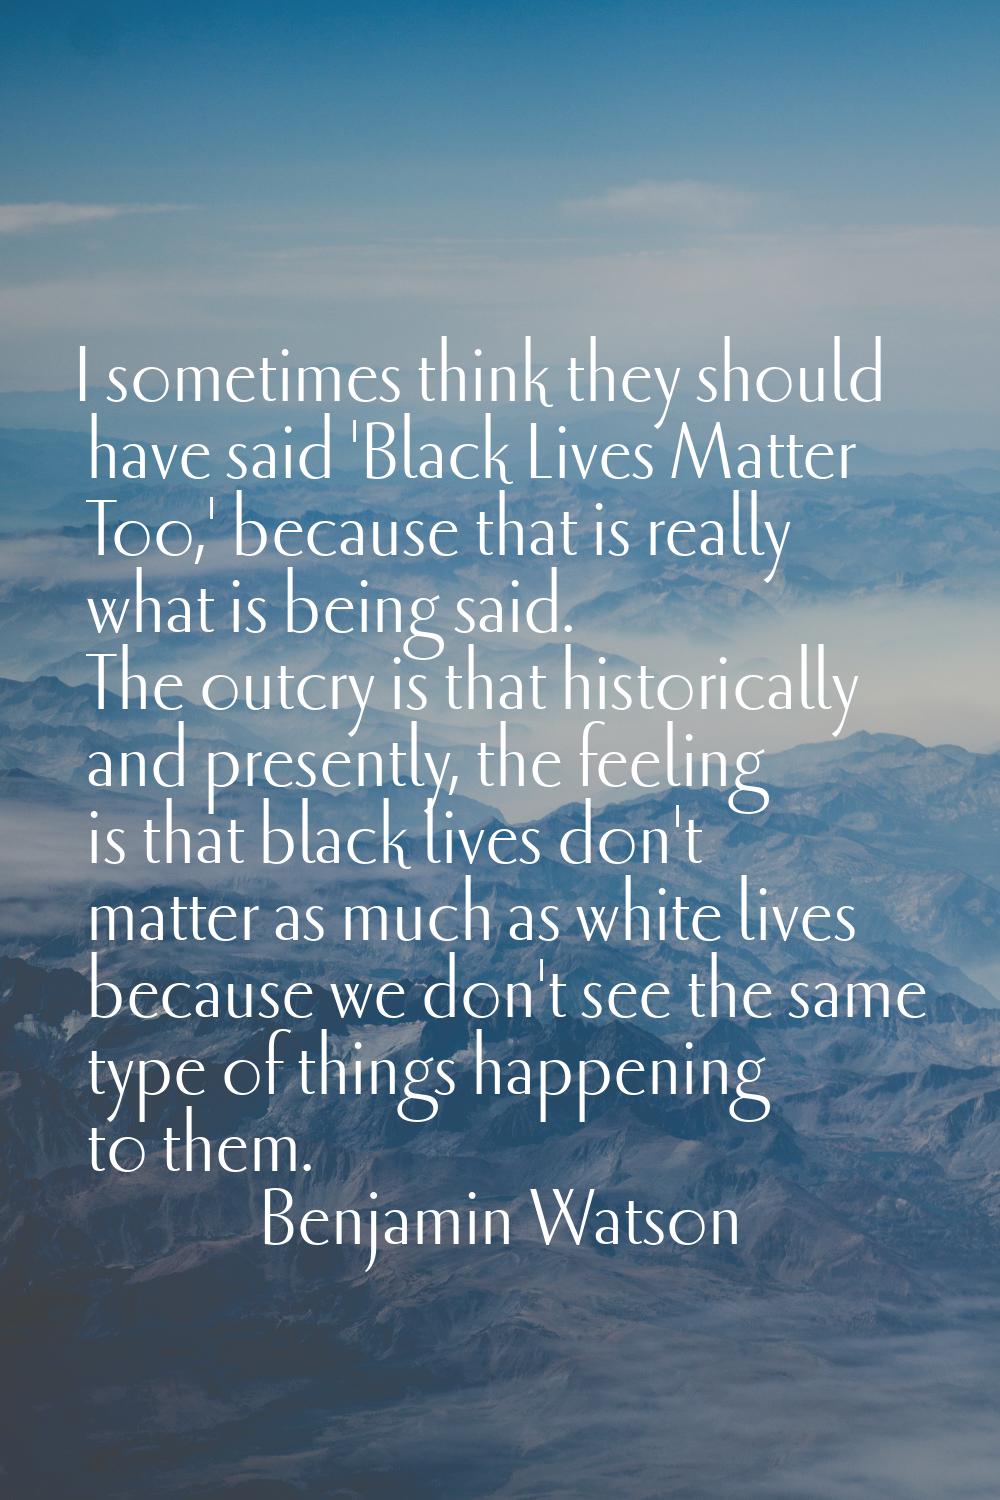 I sometimes think they should have said 'Black Lives Matter Too,' because that is really what is be